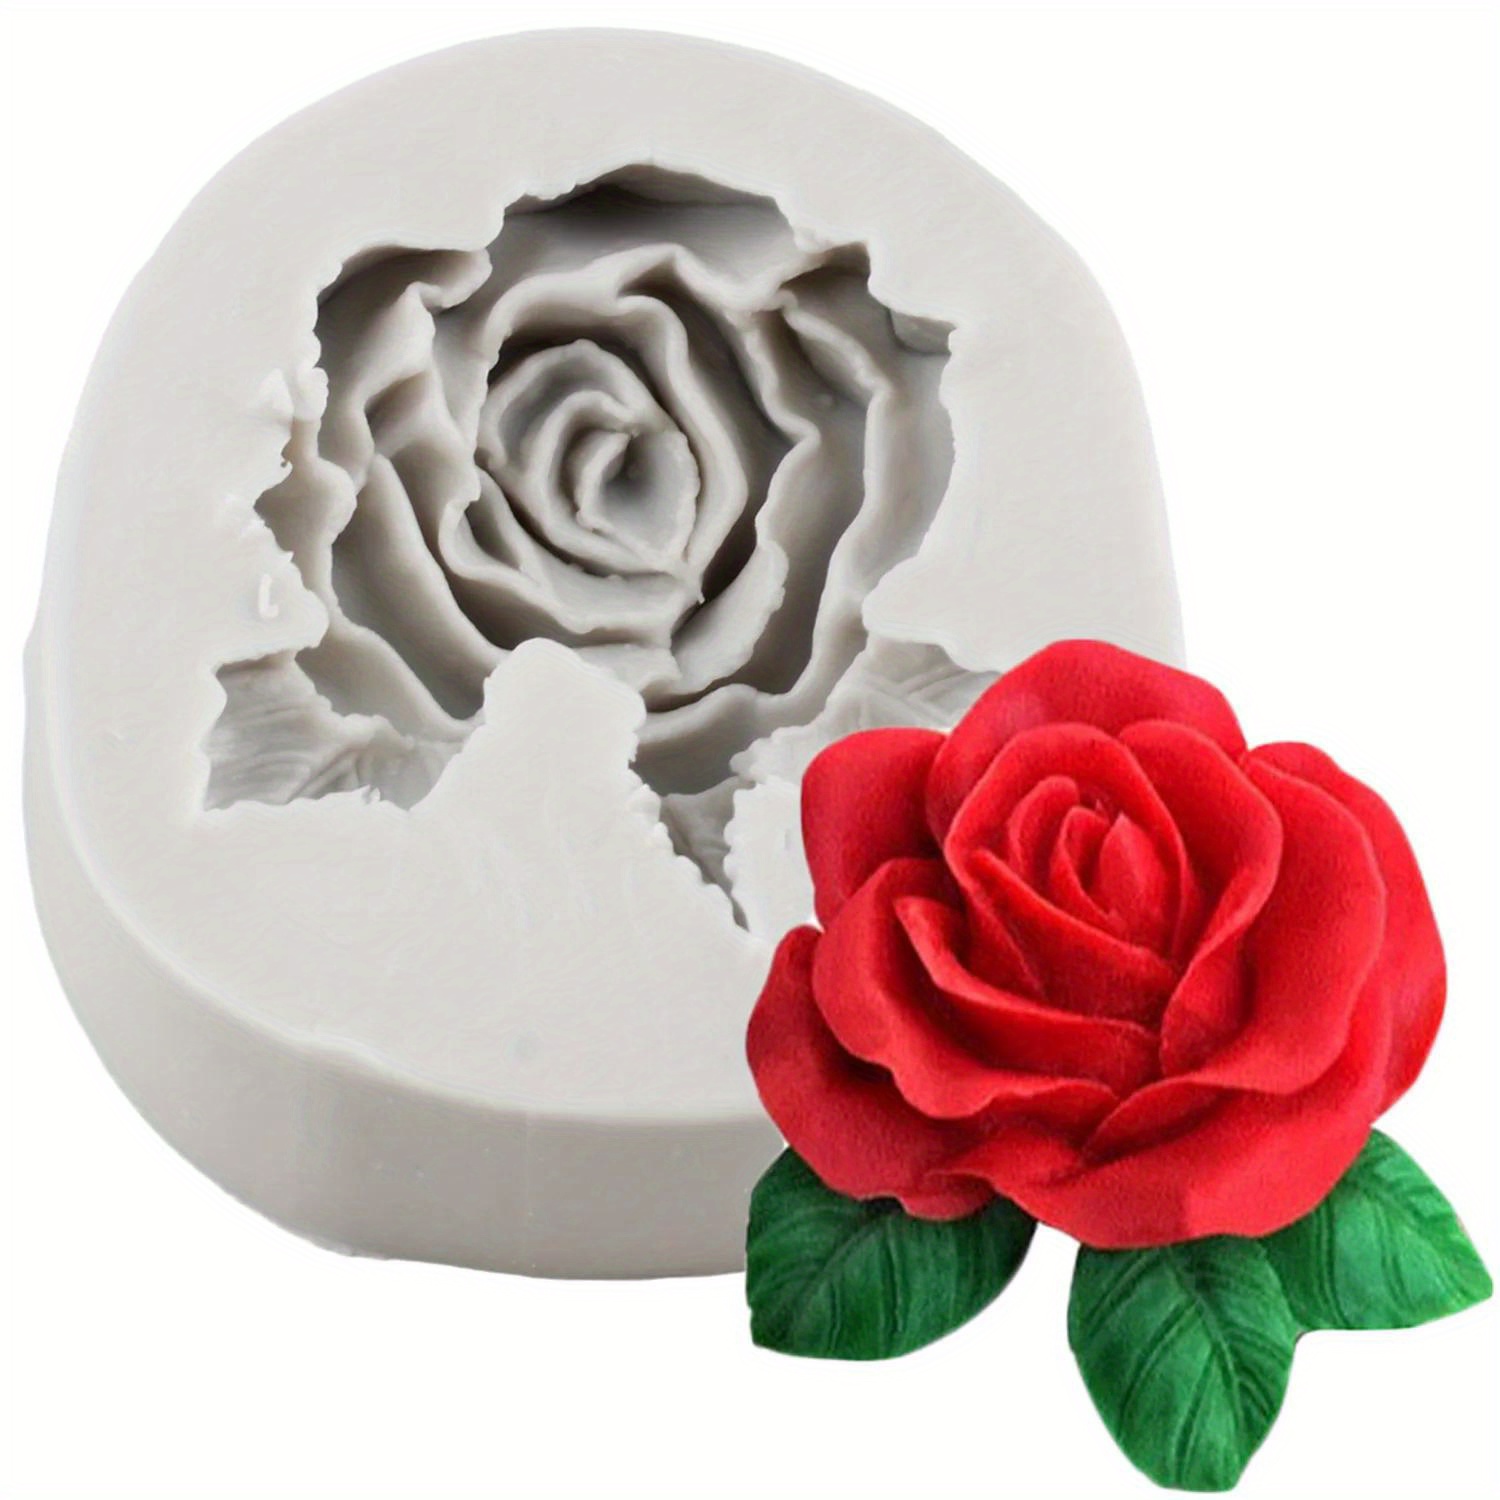 Rose silicone mold for fondant or chocolate or cake decoration